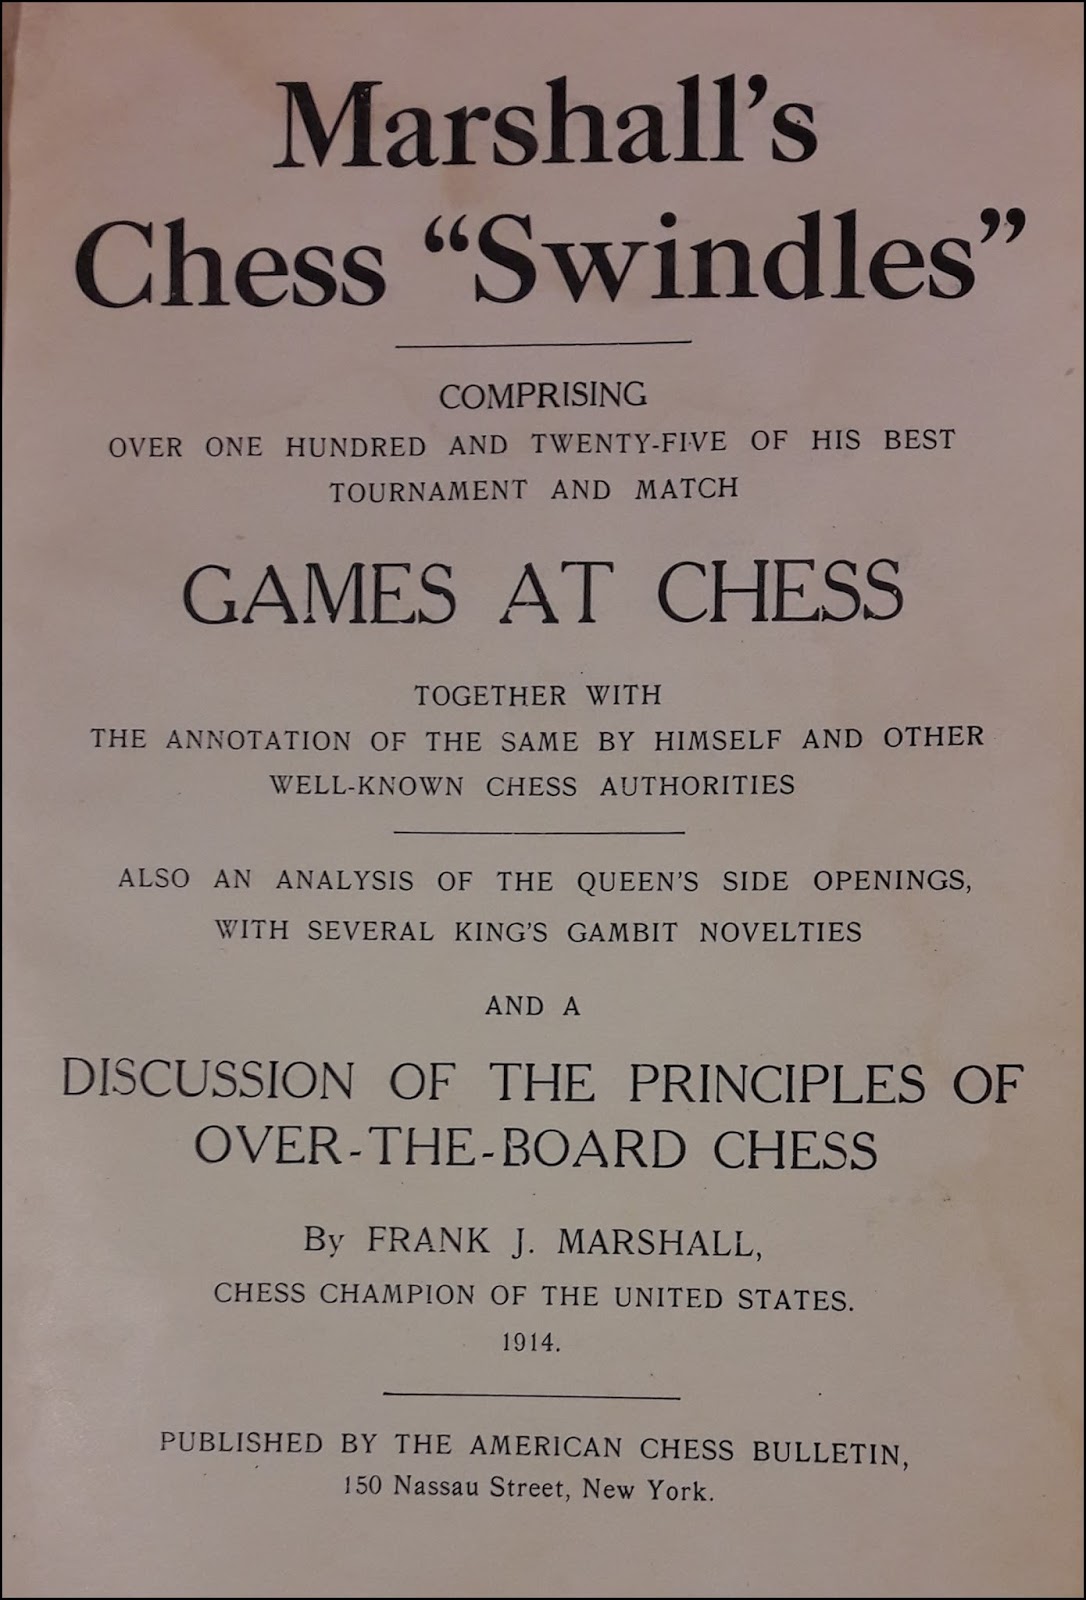 Chess Book Chats: April 2017